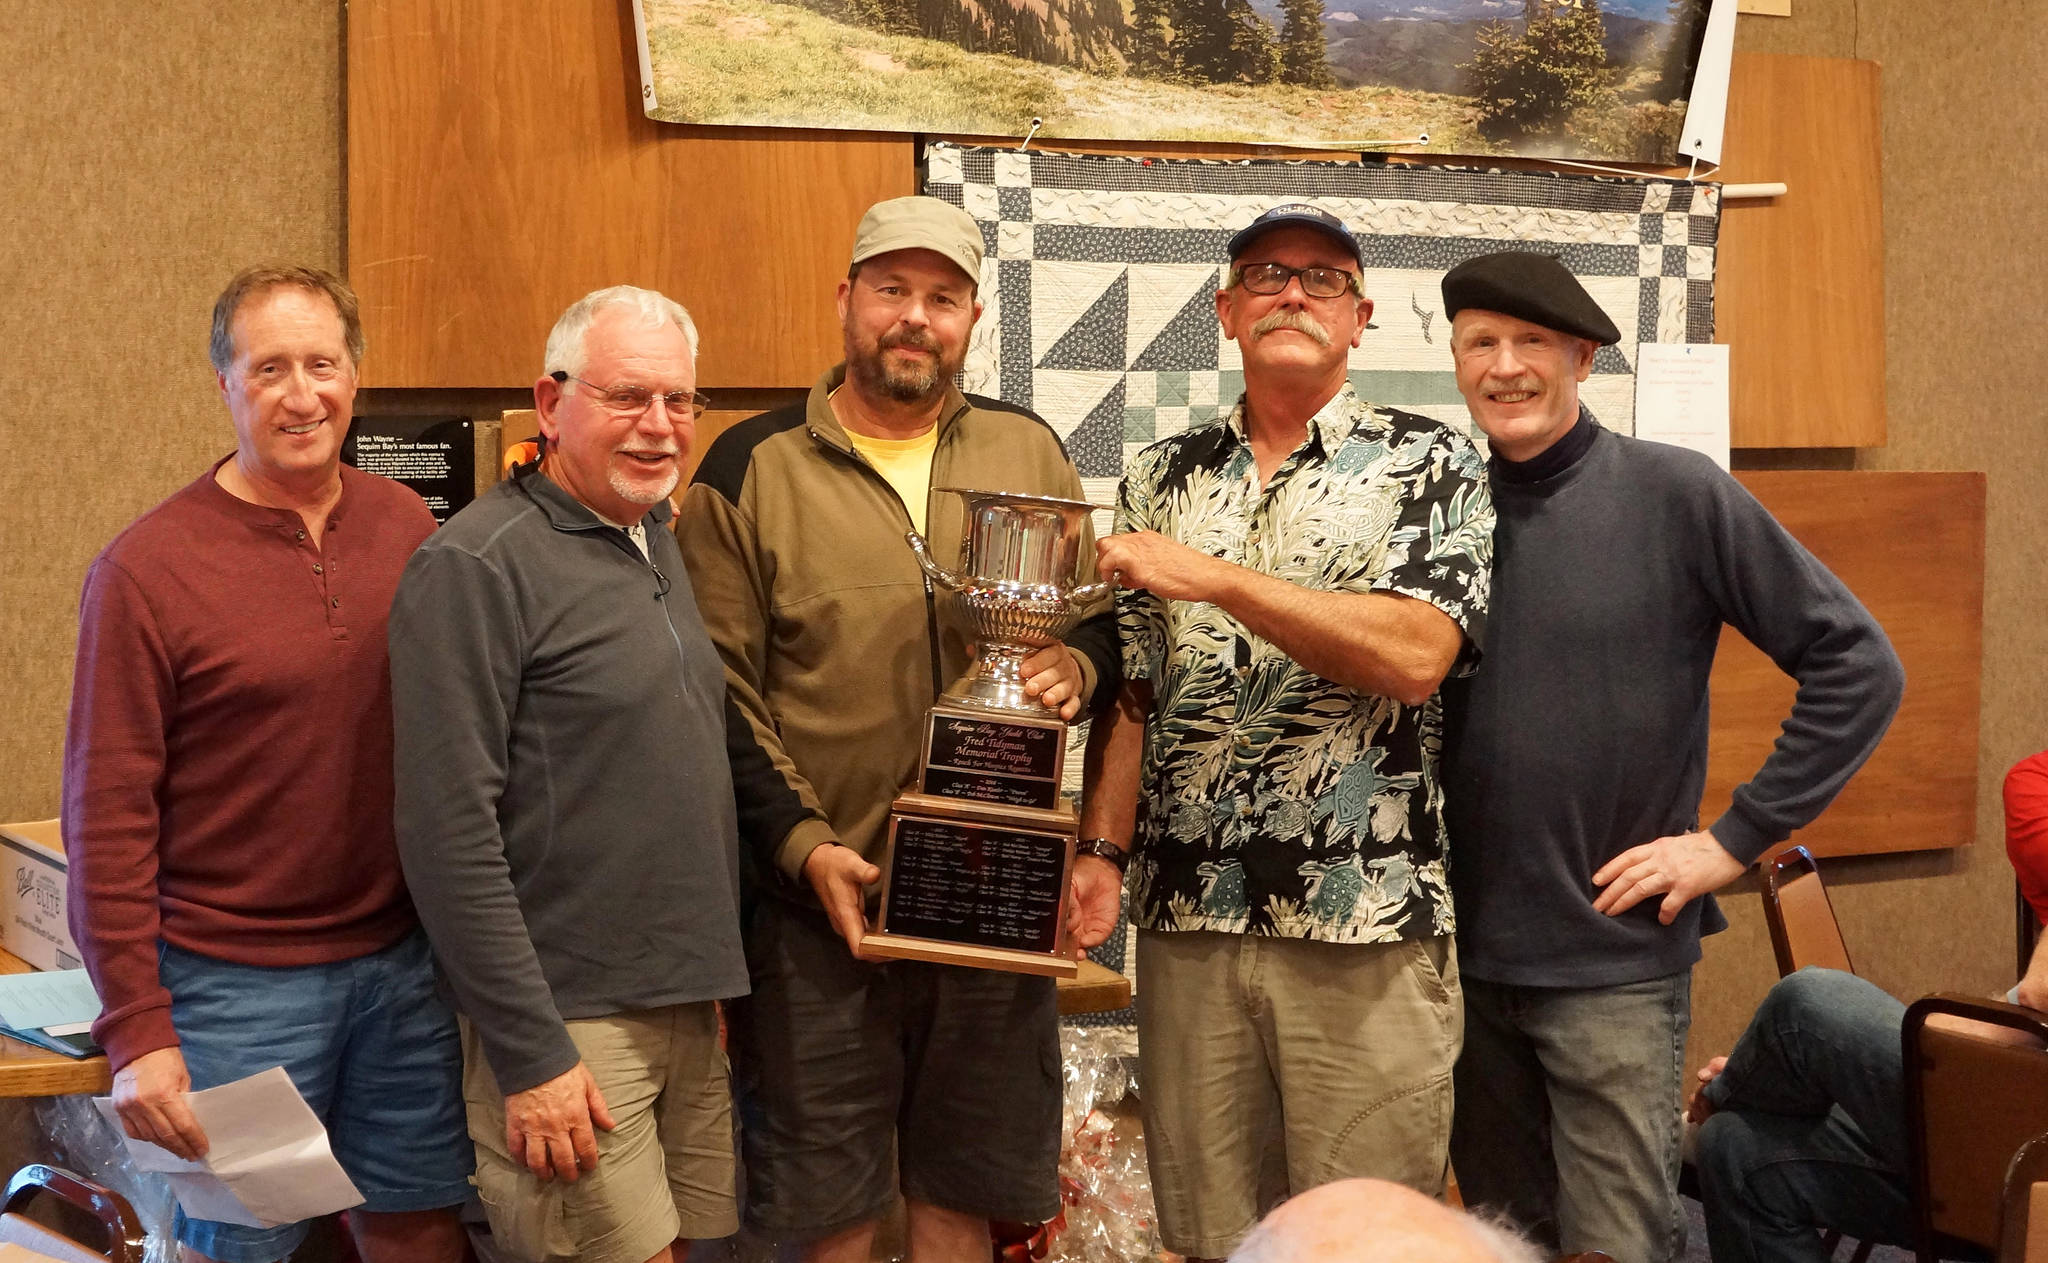 Celebrating a Division B win at the 2018 Reach for the Hospice on Sept. 15 is the crew of Malolo; skipper Alaan Clark is second from right. Submitted photo